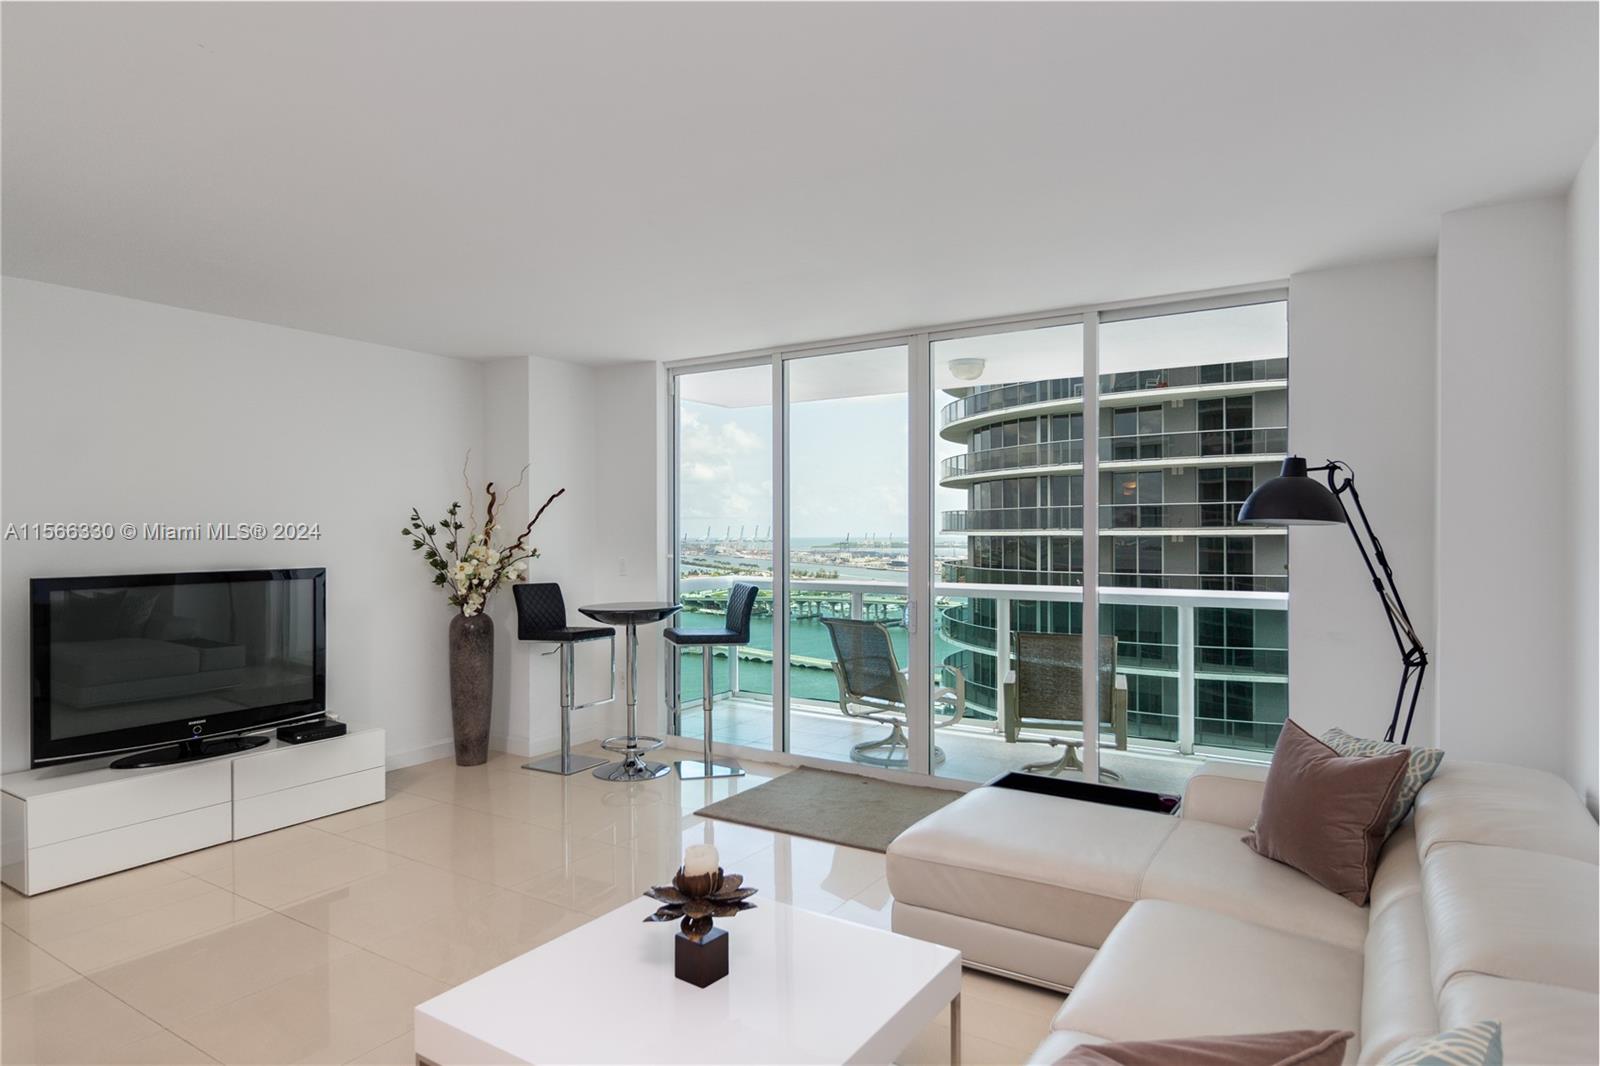 Large 1 bedroom, 1.5 baths, FURNISHED with south-east views of the Biscayne Bay and located in Edgewater, minutes away from Downtown Miami, South Beach, Midtown Shops, and the Design District. 1095 SqFt and 105 SqFt terrace. Very spacious living/dining area with spacious kitchen. Full service building with gym, sauna and steam rooms, heated swimming pool and 24-hour concierge, security, and valet parking services, plus additional bicycle storage. Across the street is Margaret Pace Park with Tennis/Volley courts, playground, outdoor exercise and water sports. 1 parking space included. Rent includes water, basic internet/cable. Close to the Metro mover, supermarkets, restaurants, art & entertainment centers. $1,500 security deposit due to association.